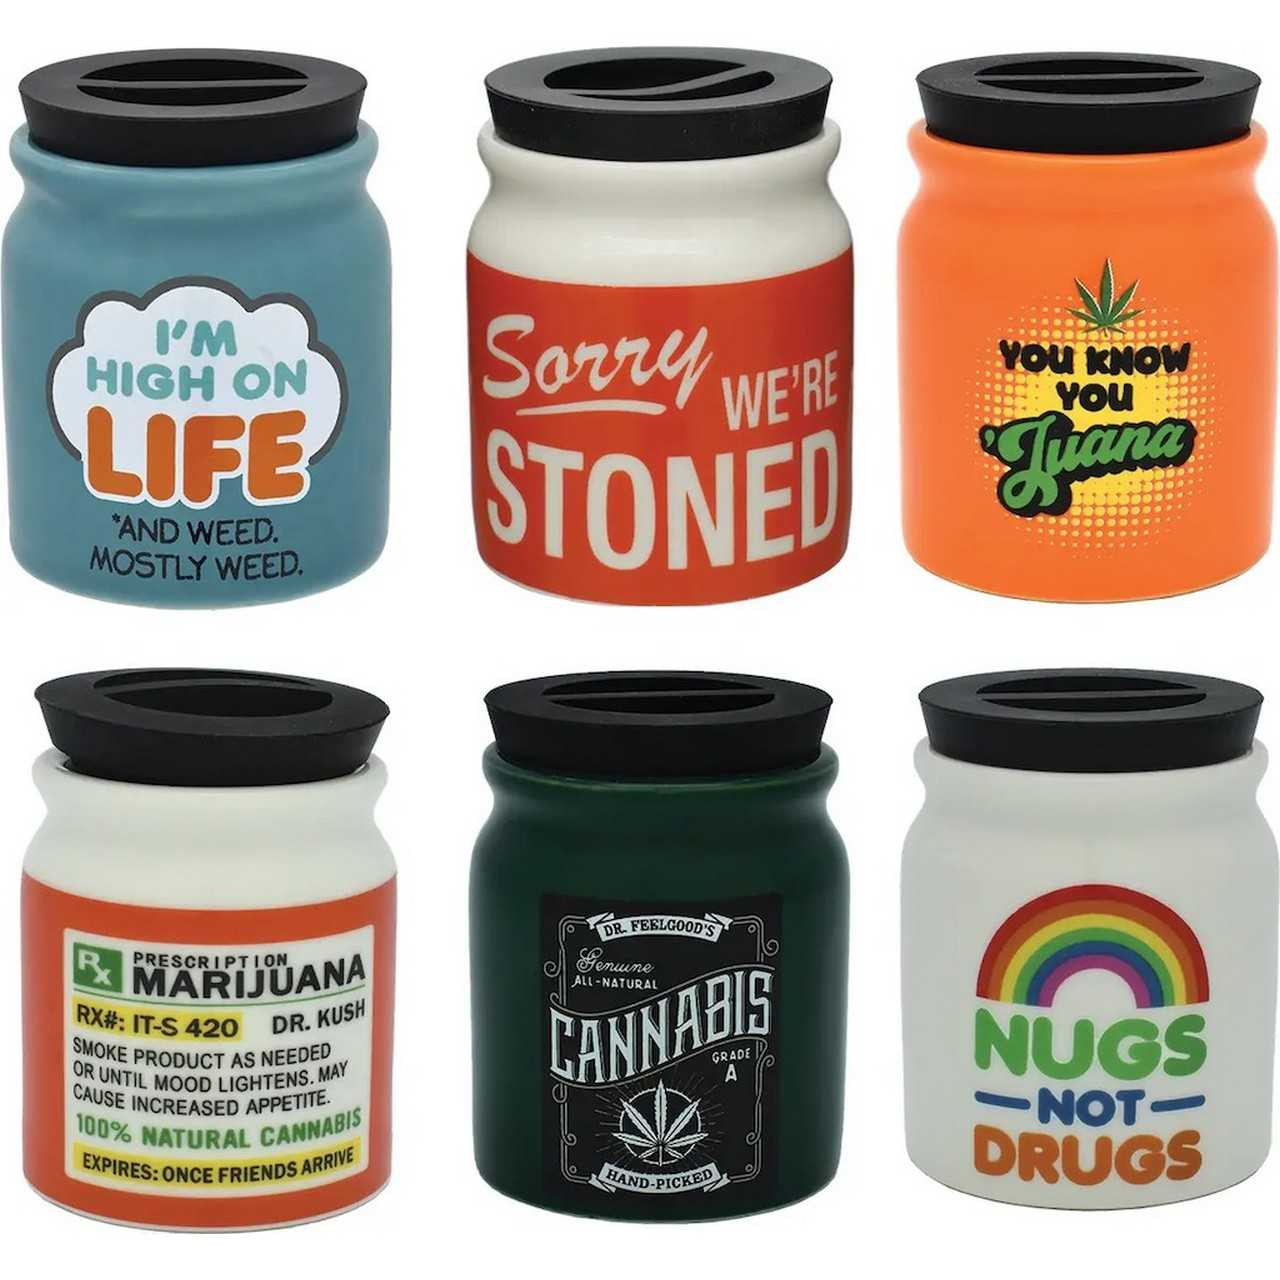 https://cdn11.bigcommerce.com/s-36vh87glm0/images/stencil/1280x1280/products/16569/36576/Streamline-Stash-Jar-with-Silicone-Lid_25281__30608.1696972543.jpg?c=1?imbypass=on